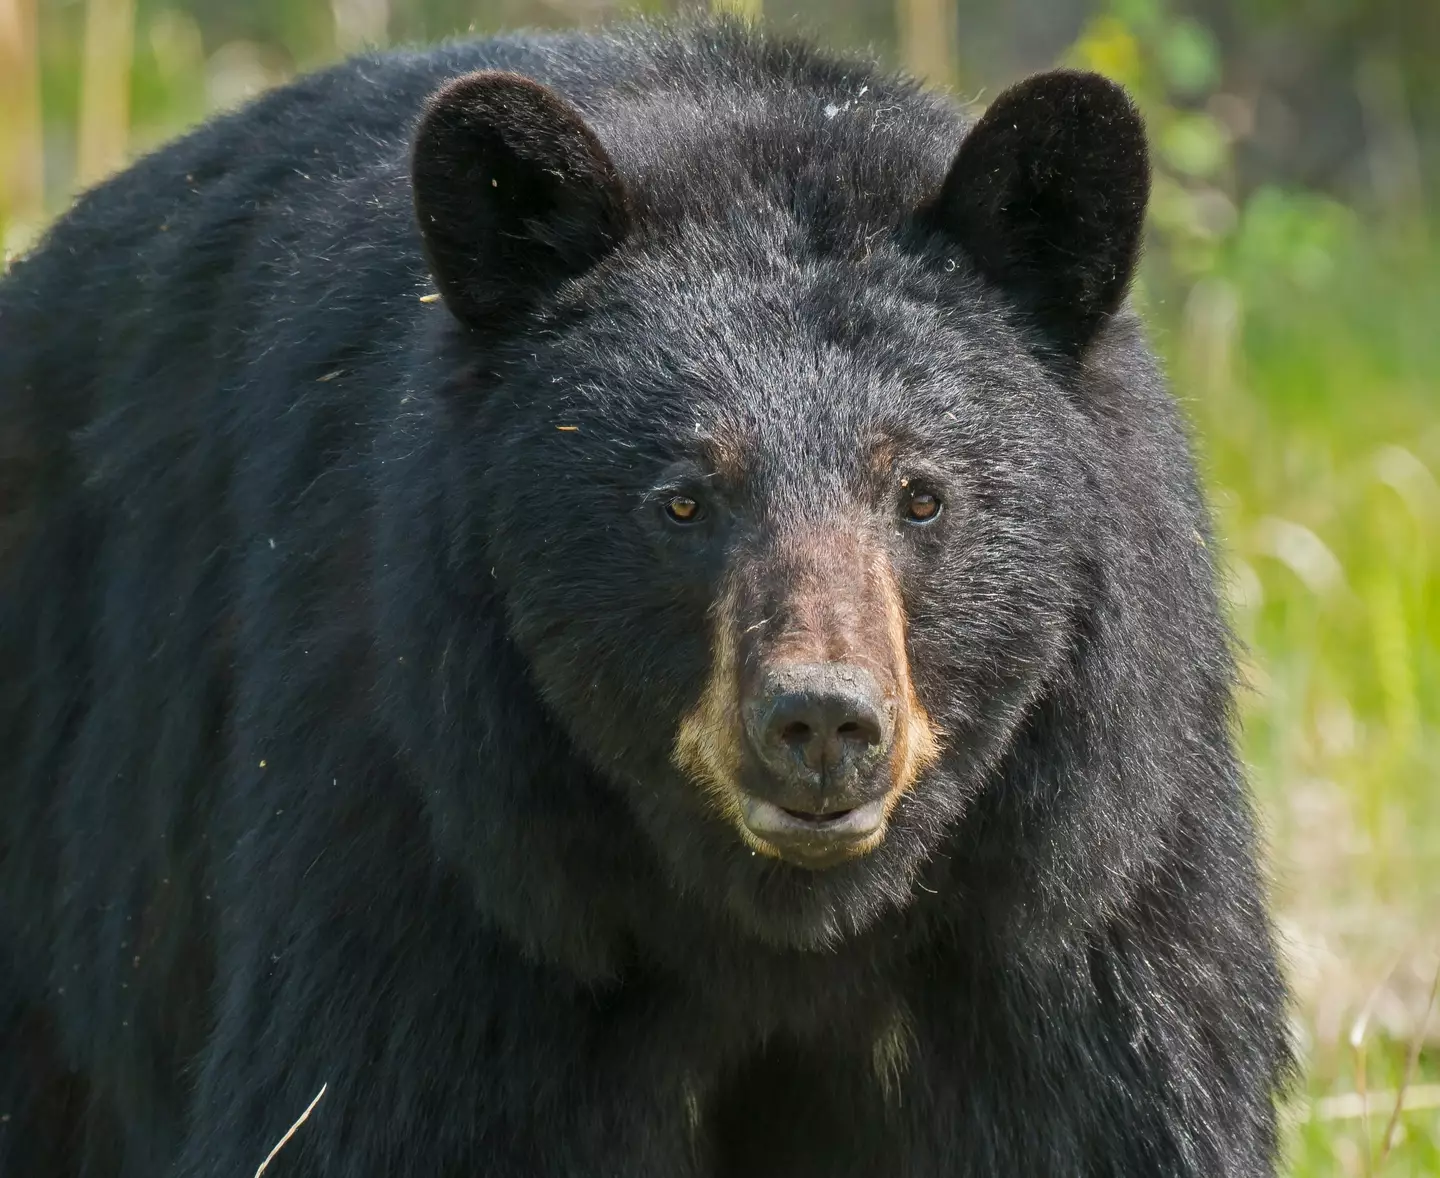 The US National Parks Service has advised to fight back if a black bear charges and attacks.